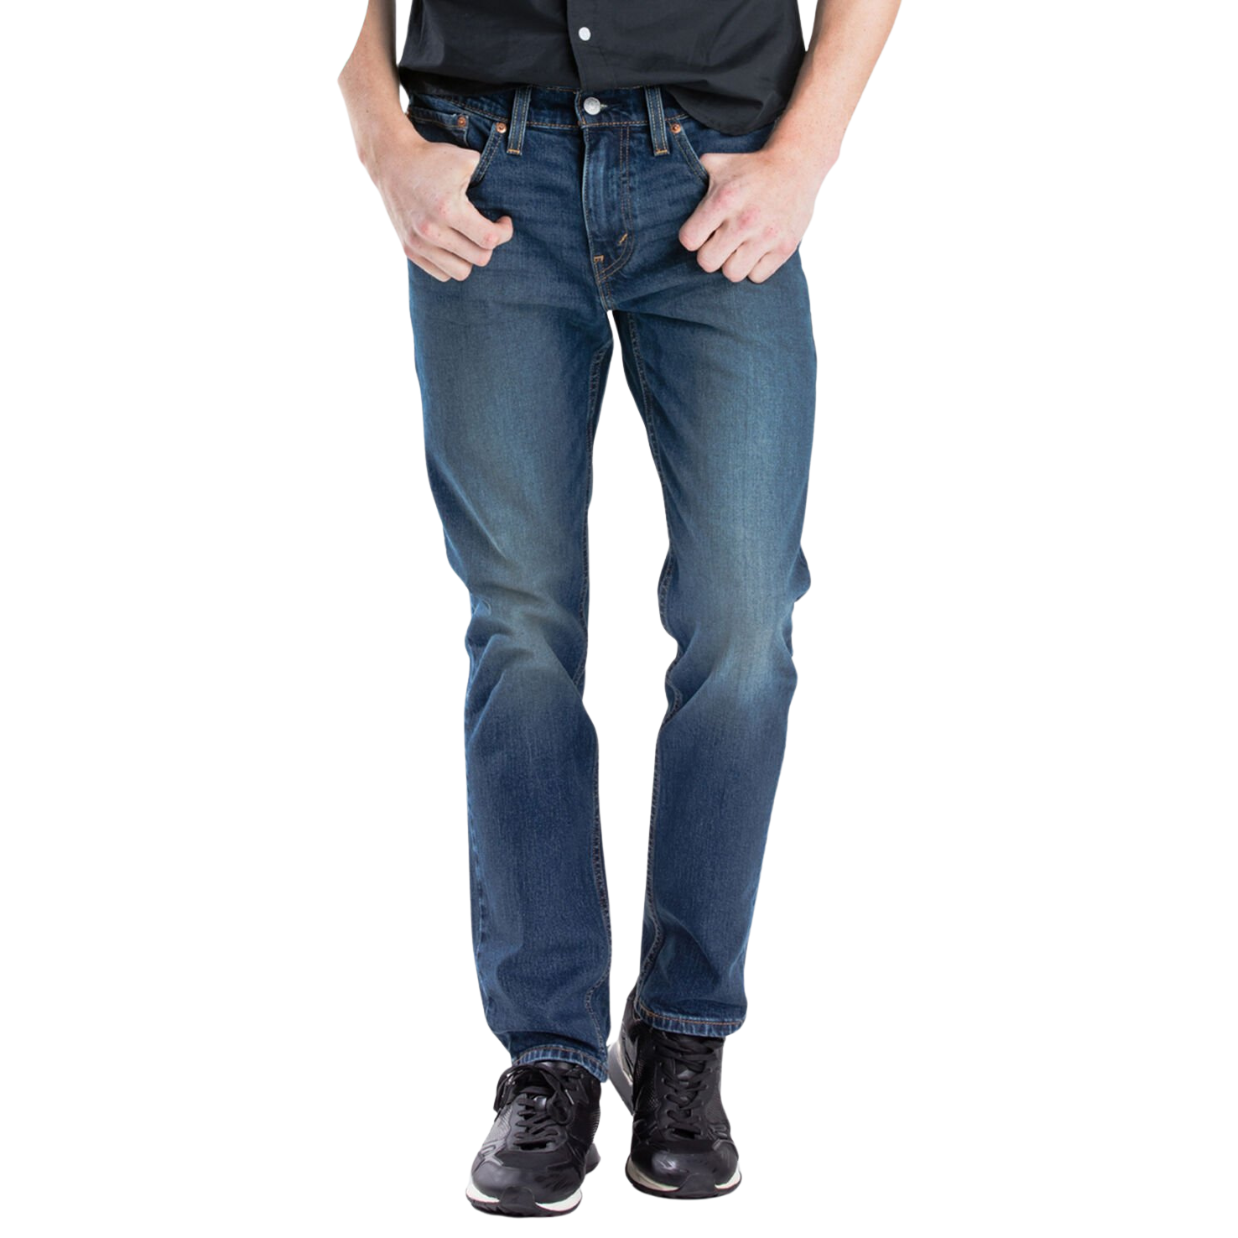 Levis® 511 Slim Fit Jean 3232 Canyon Dark Mens Jeans by Levis | The Bloke Shop - Adelaide